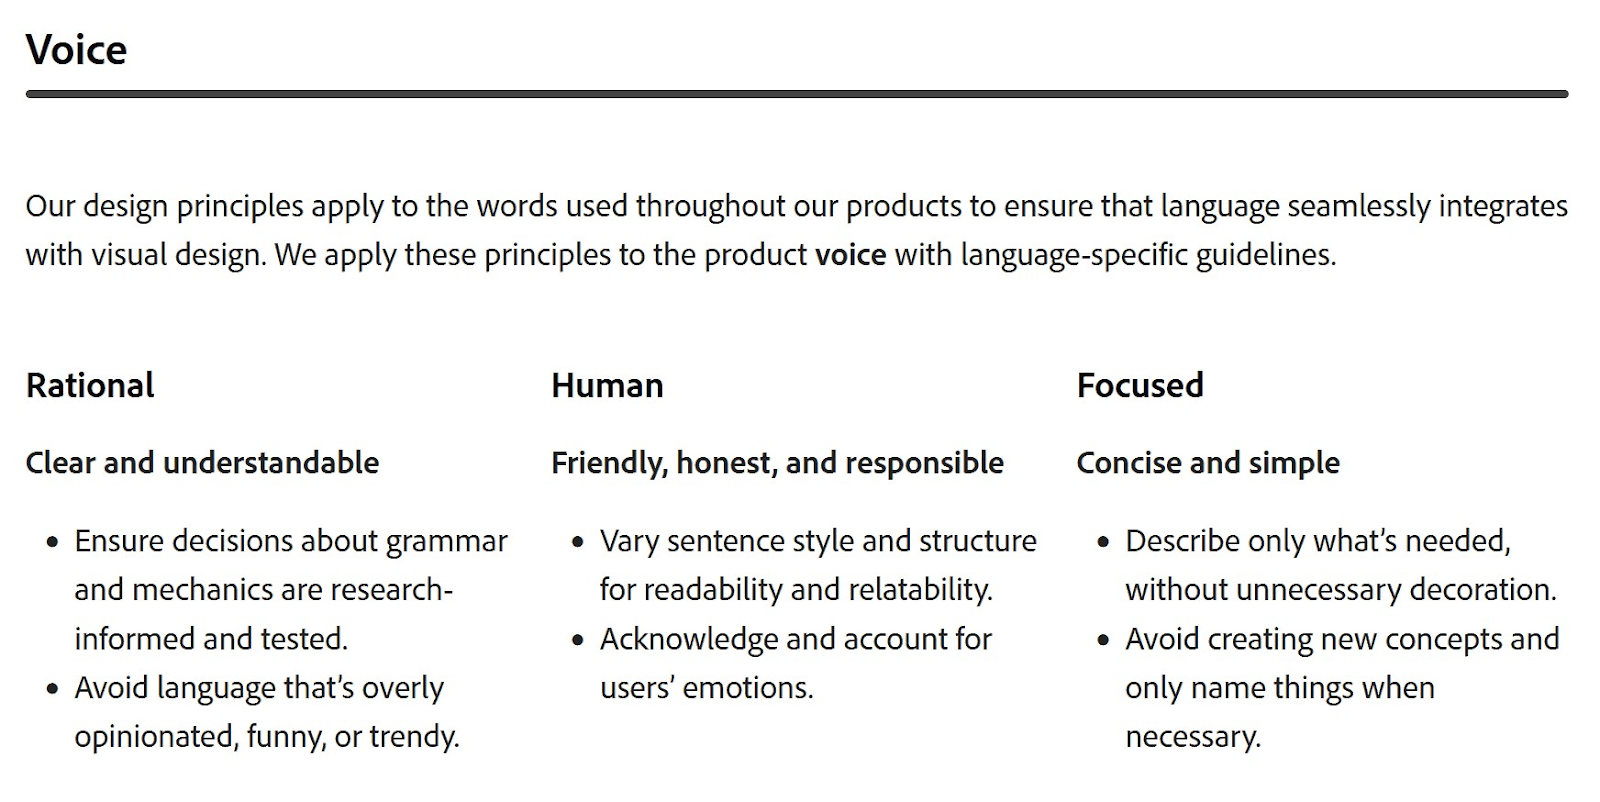 "Voice" section of Adobe's brand guidelines